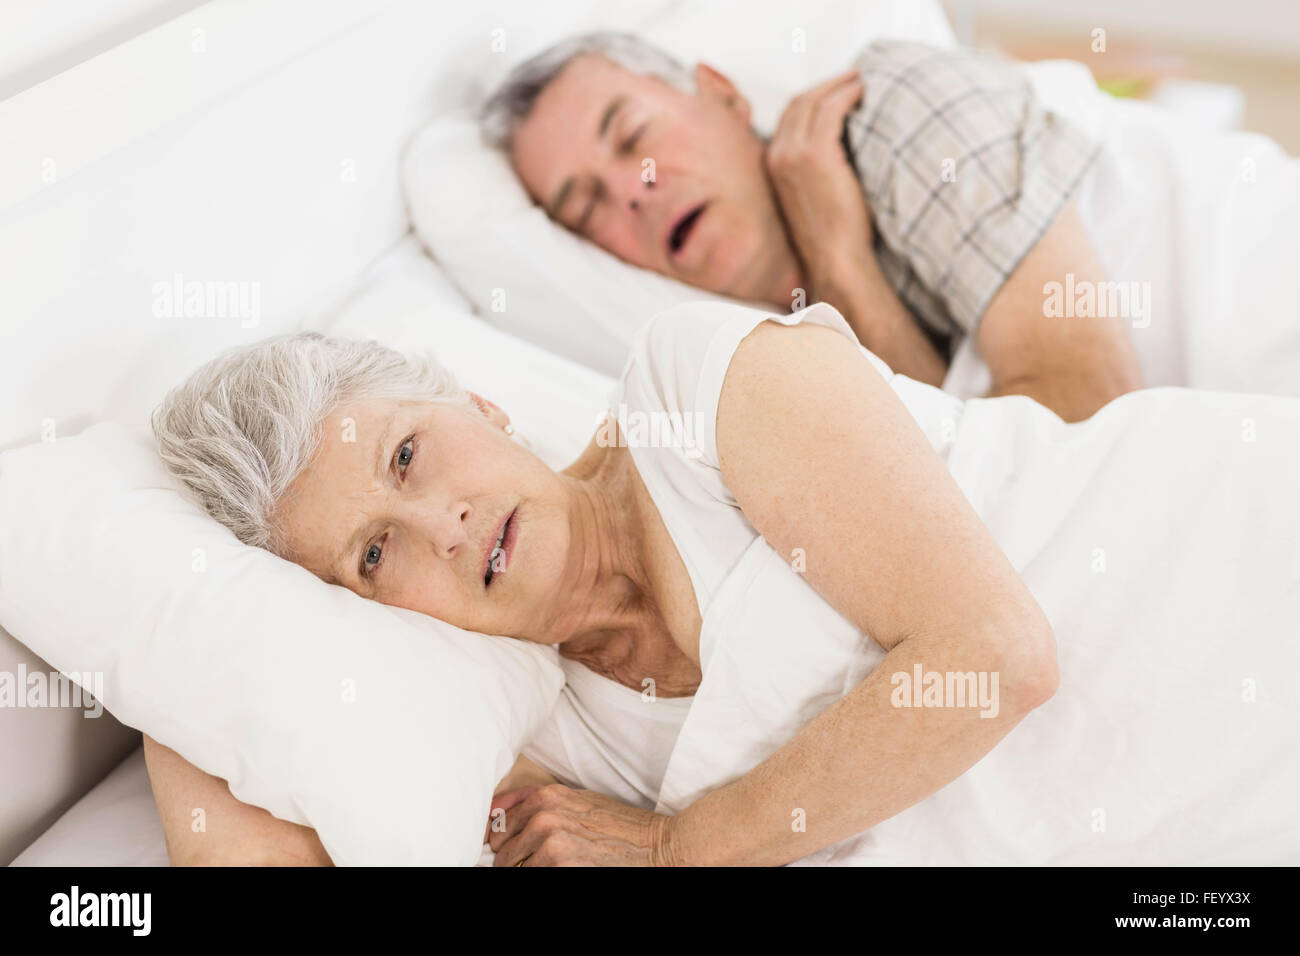 Awake senior woman in bed Banque D'Images